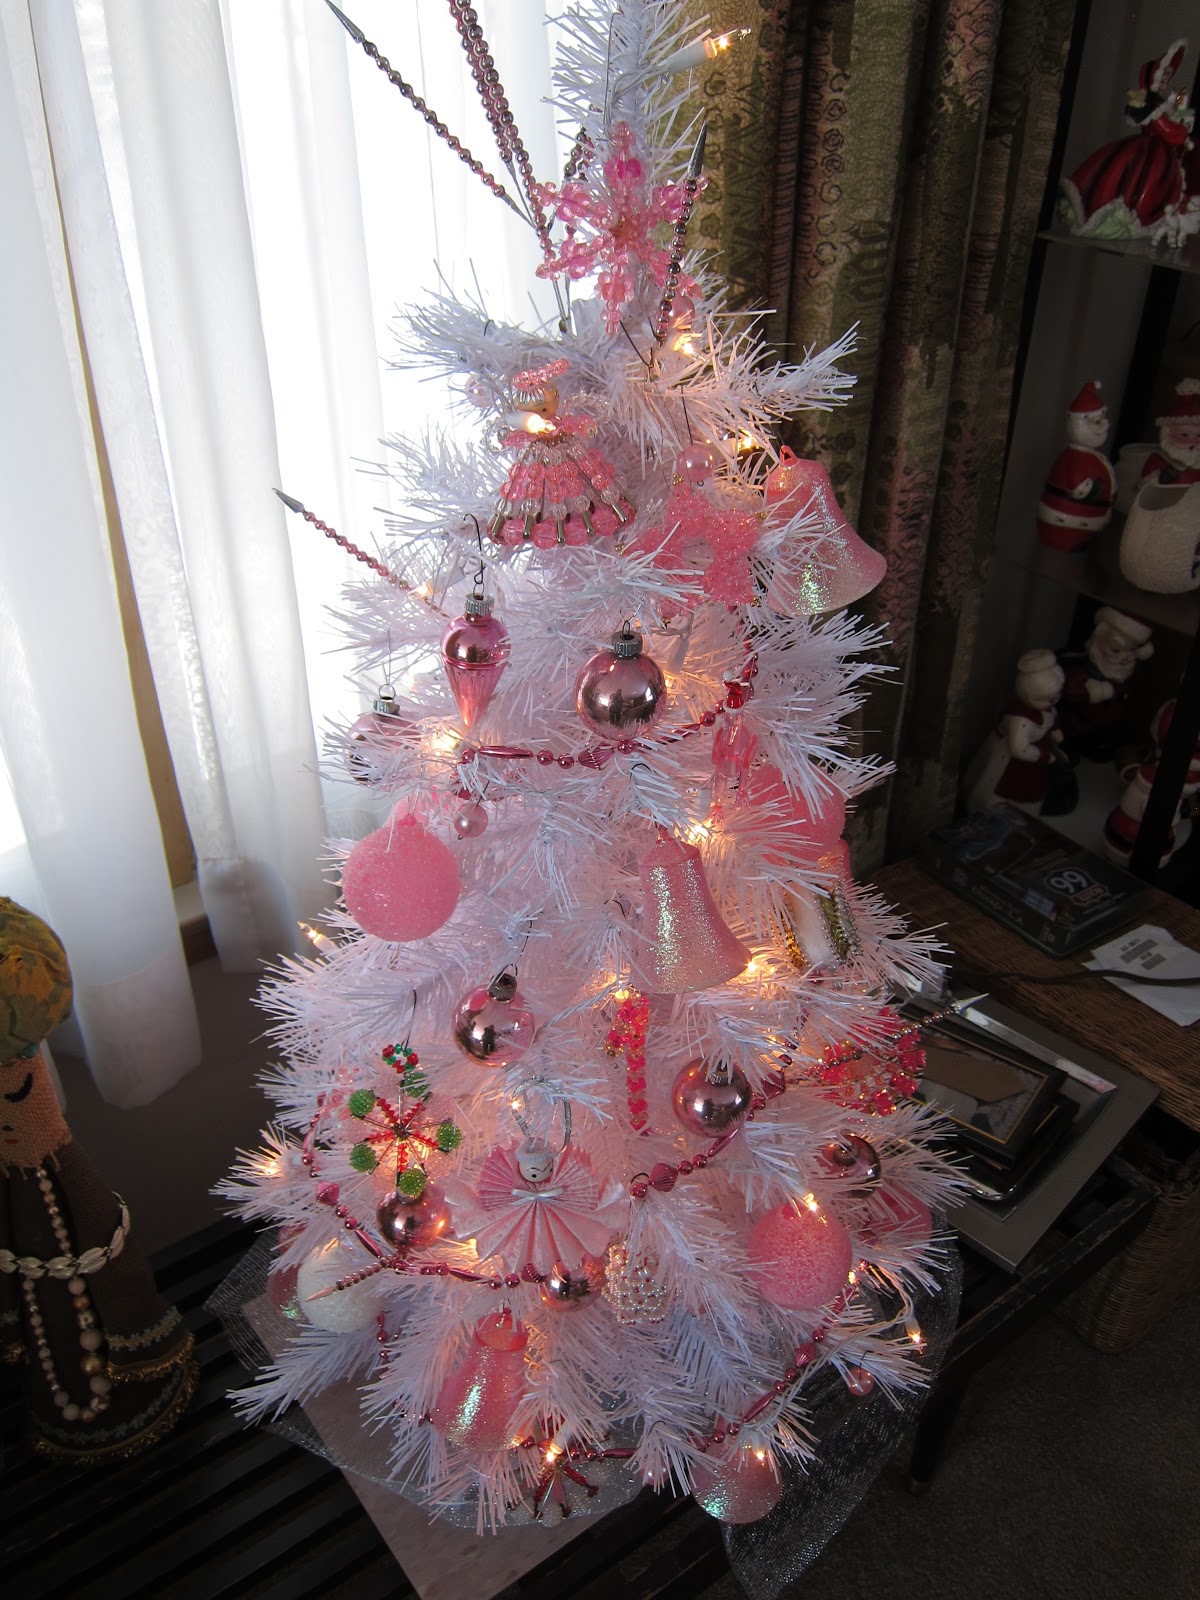 The Vintage Life: A Very Merry Pink Christmas